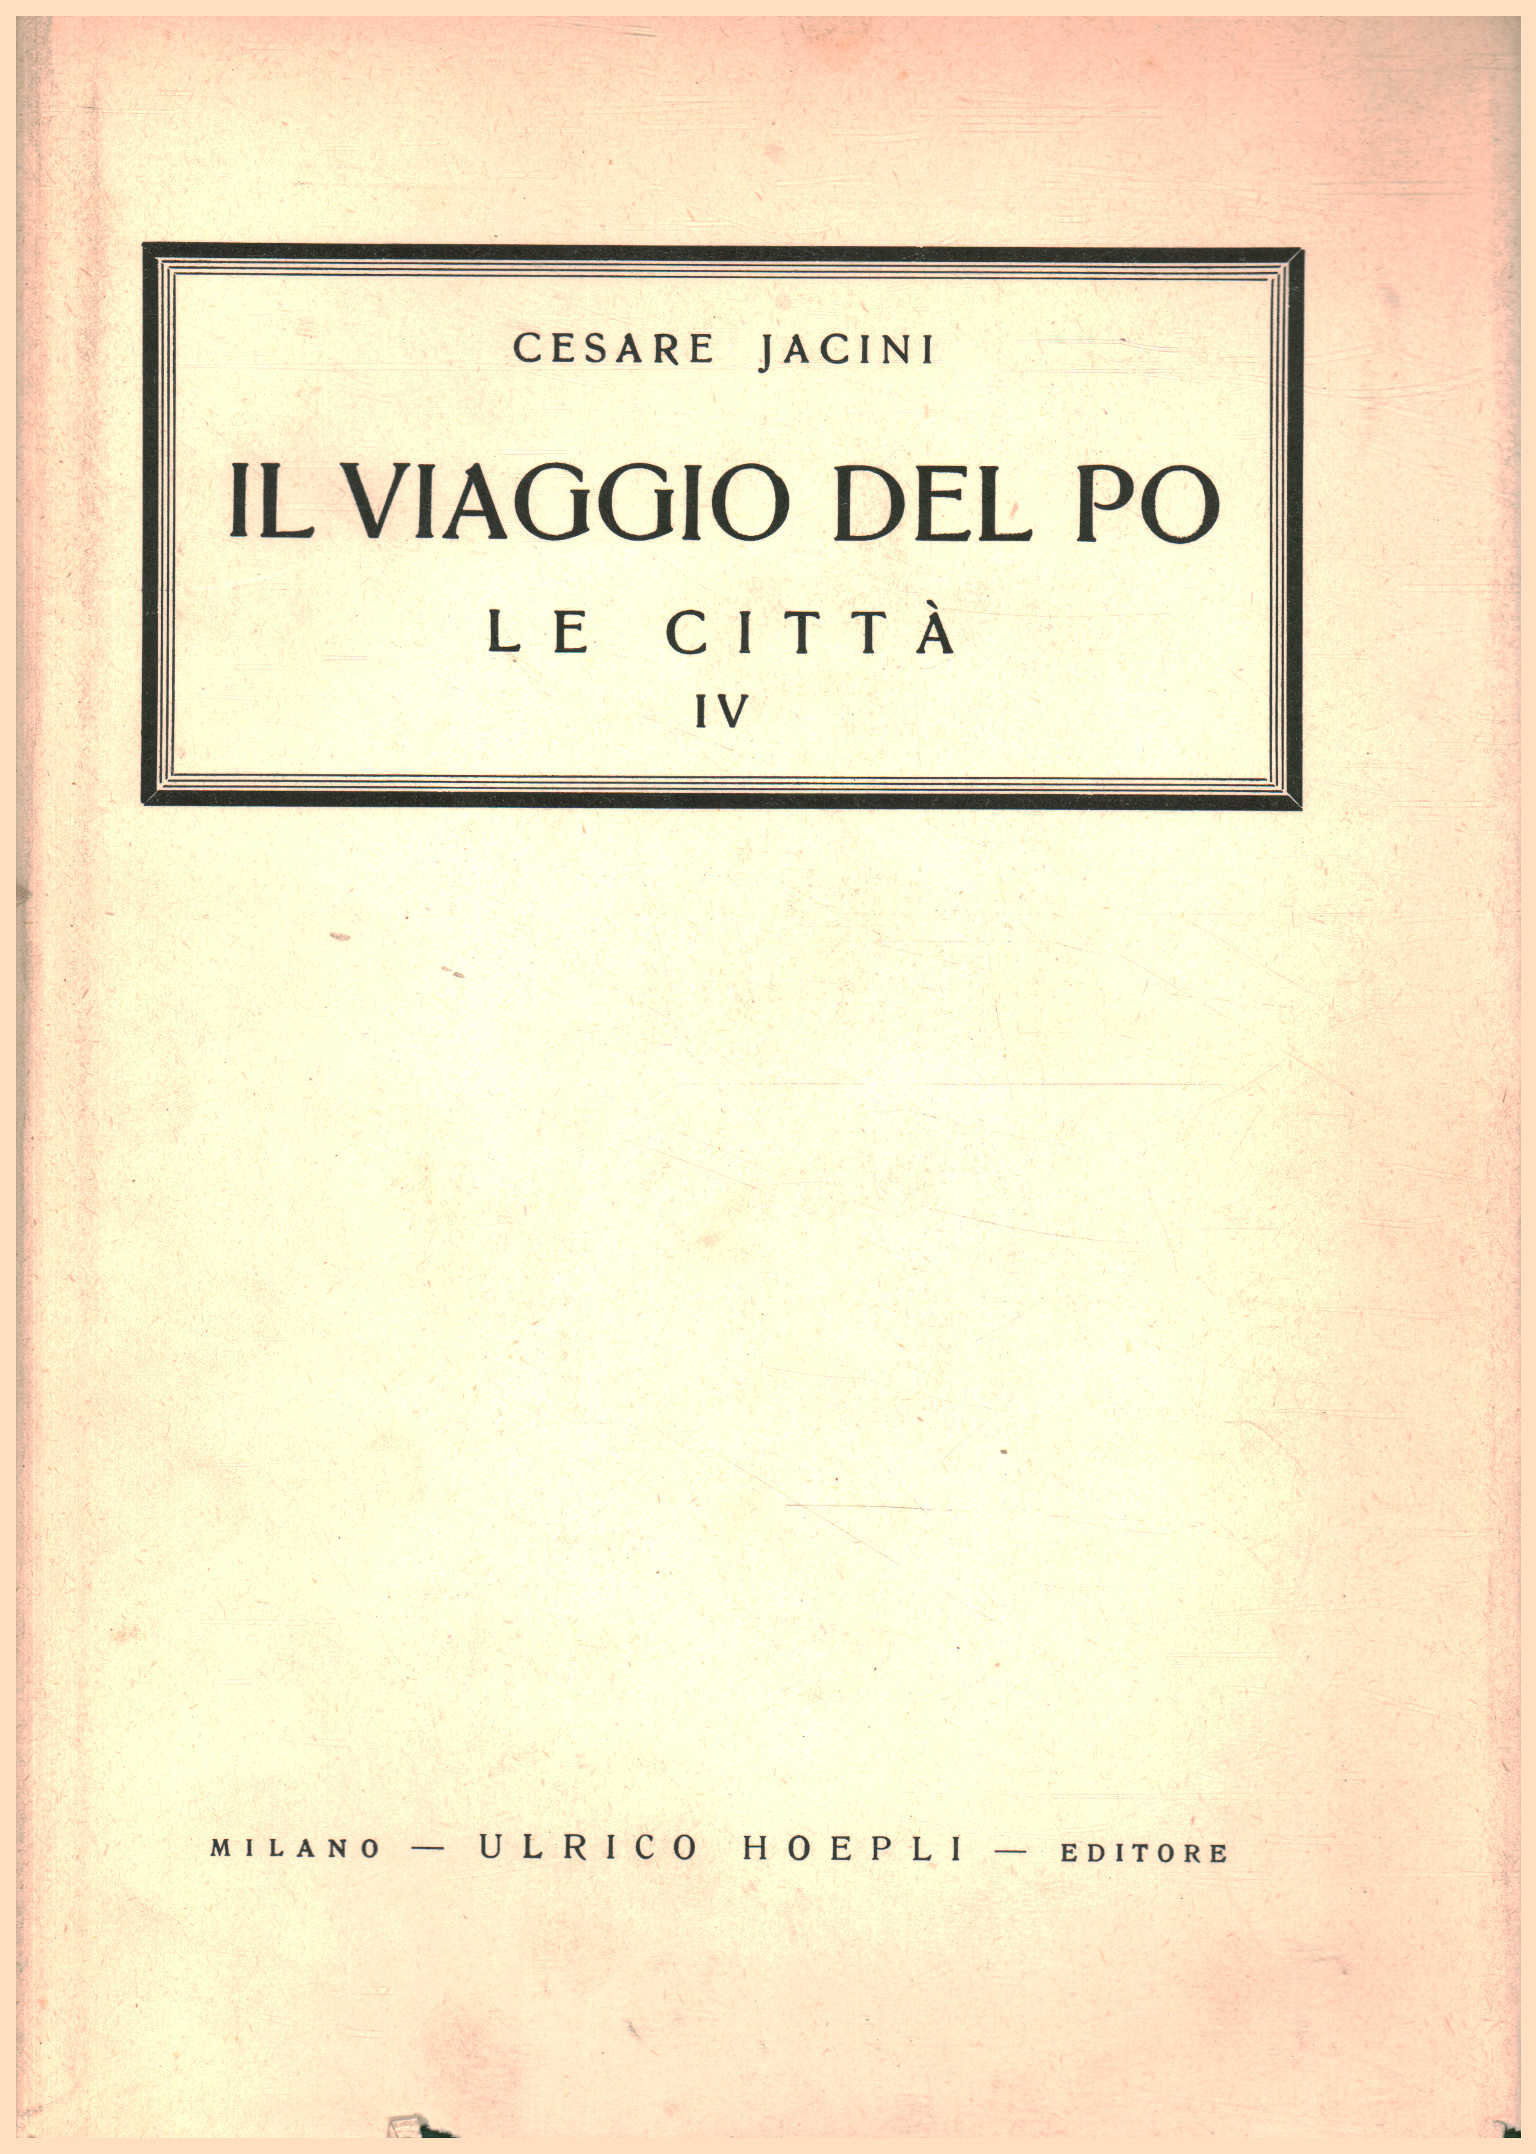 The journey of the Po. Vol. VII. The cities. Part IV. V, Cesare Jacini